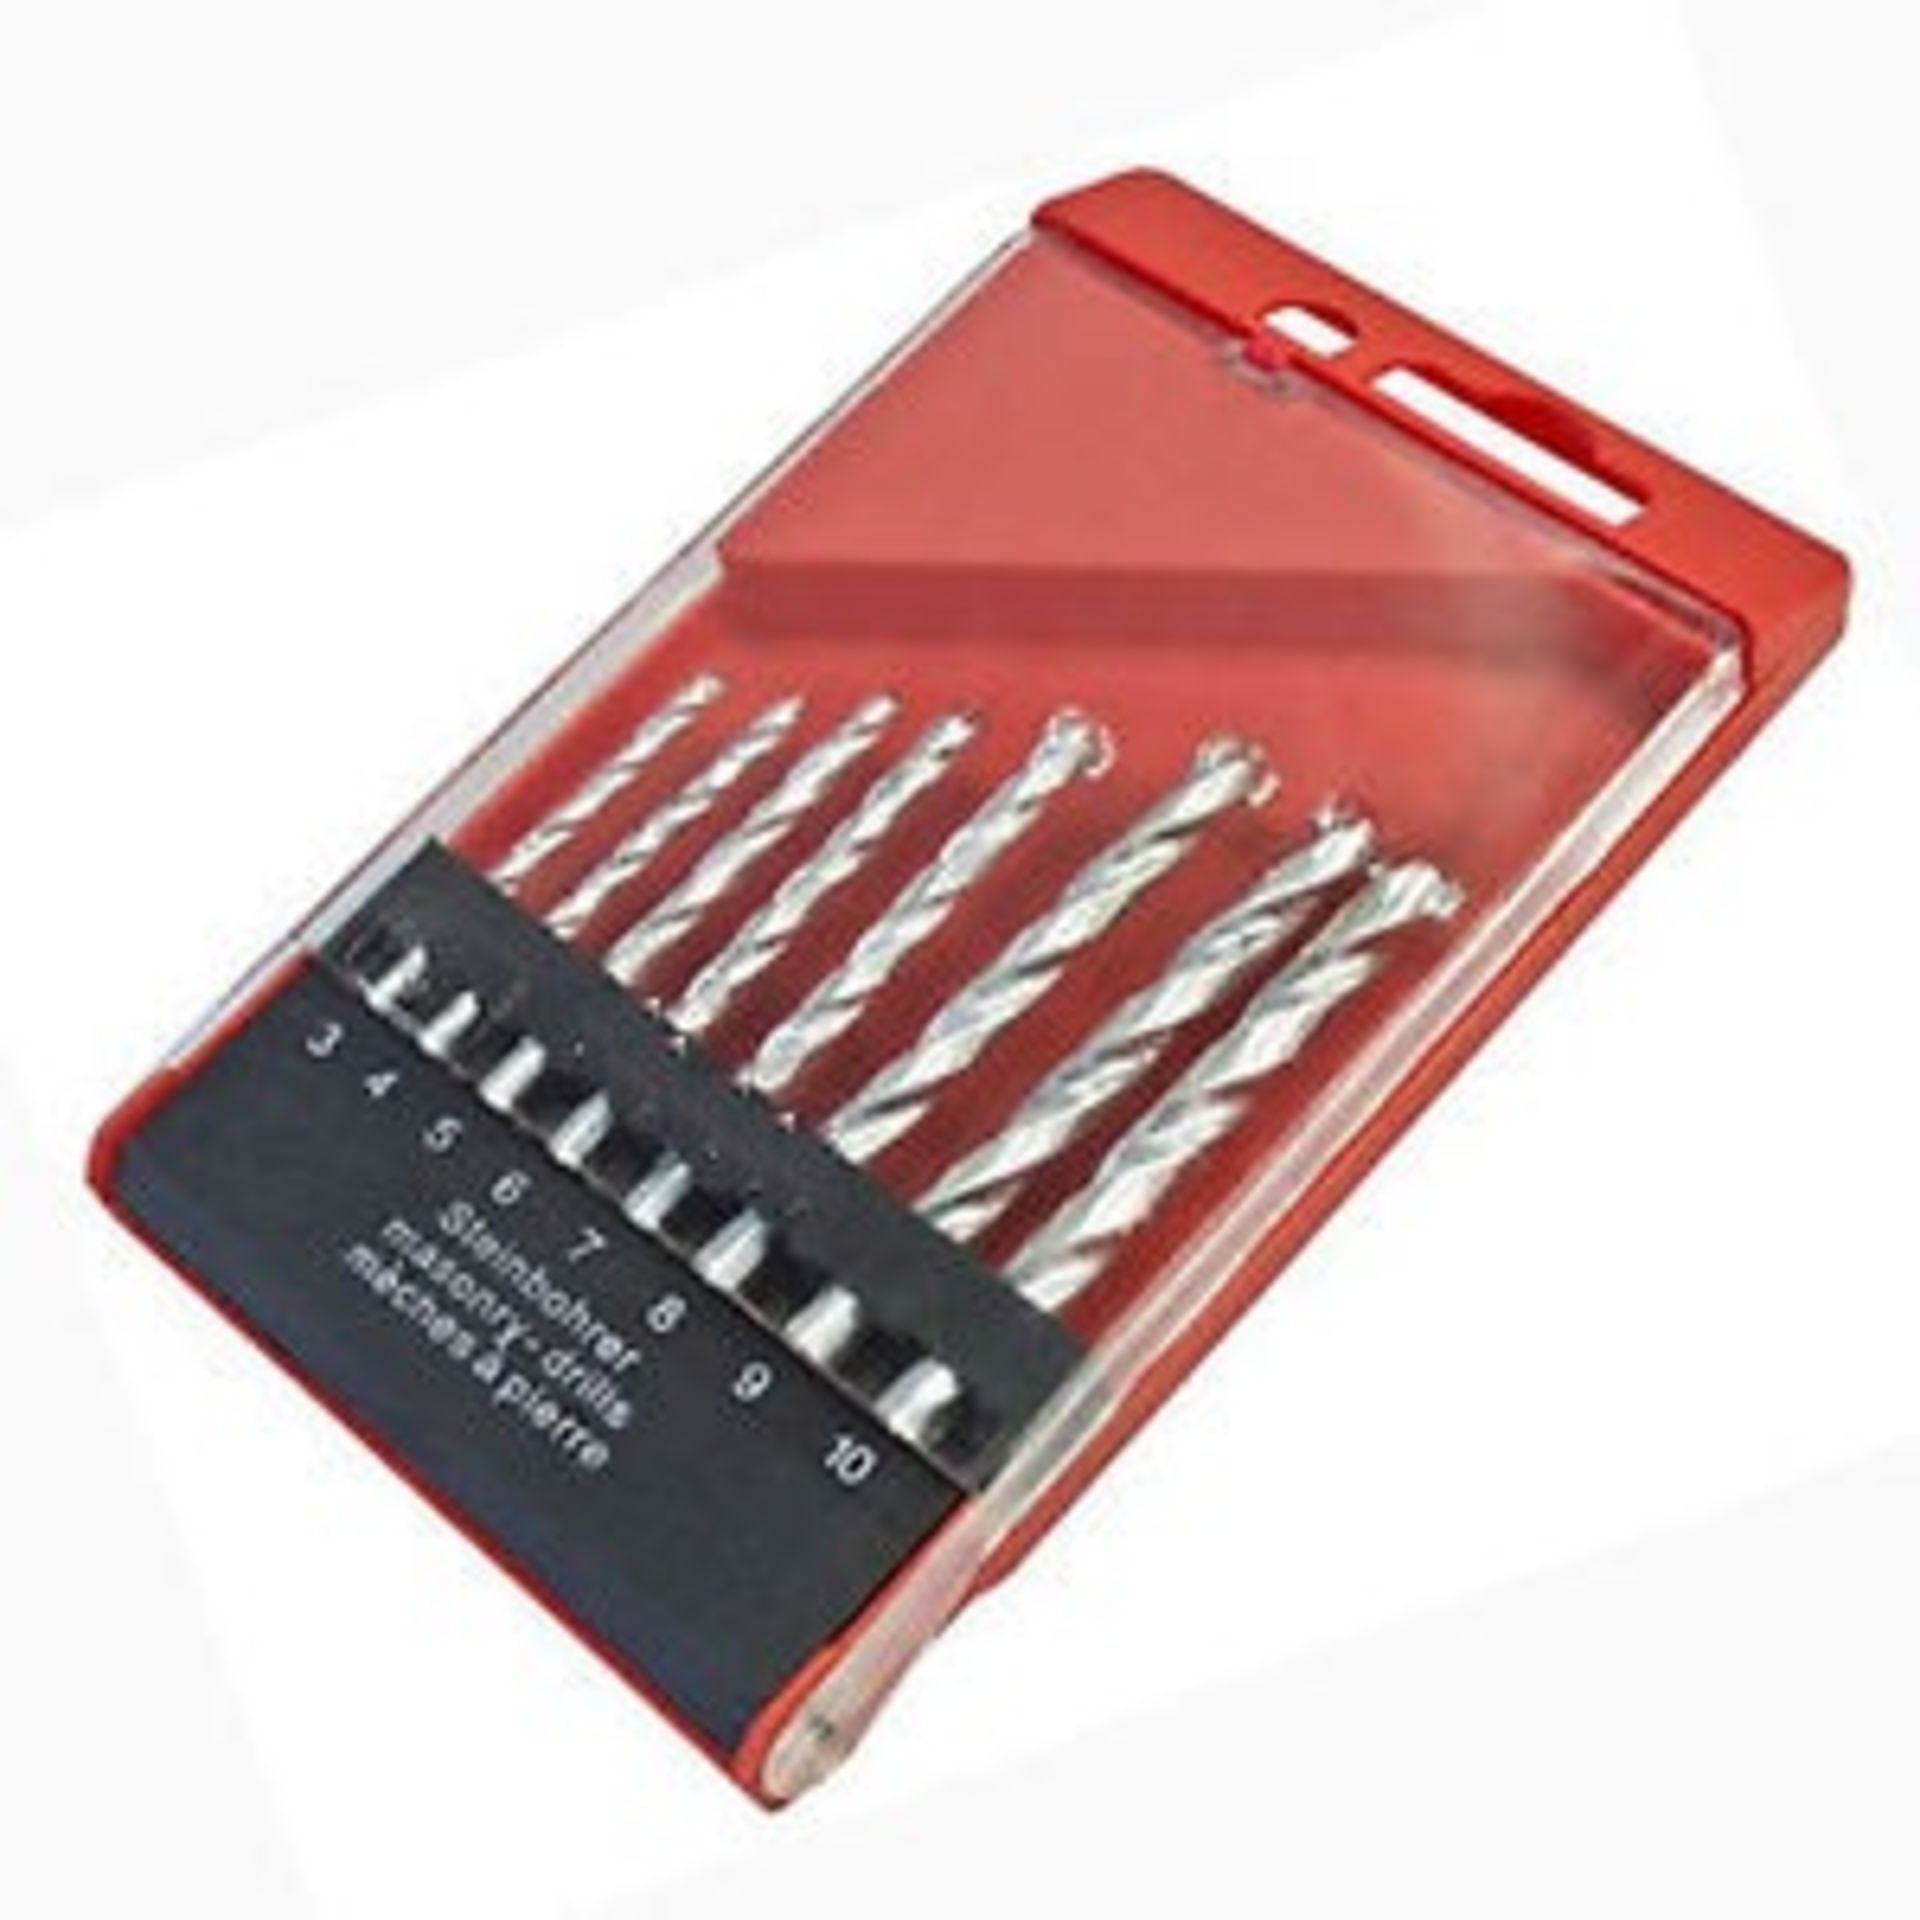 V *TRADE QTY* Brand New 8pc Masonry Drill Bit Set X 8 YOUR BID PRICE TO BE MULTIPLIED BY EIGHT